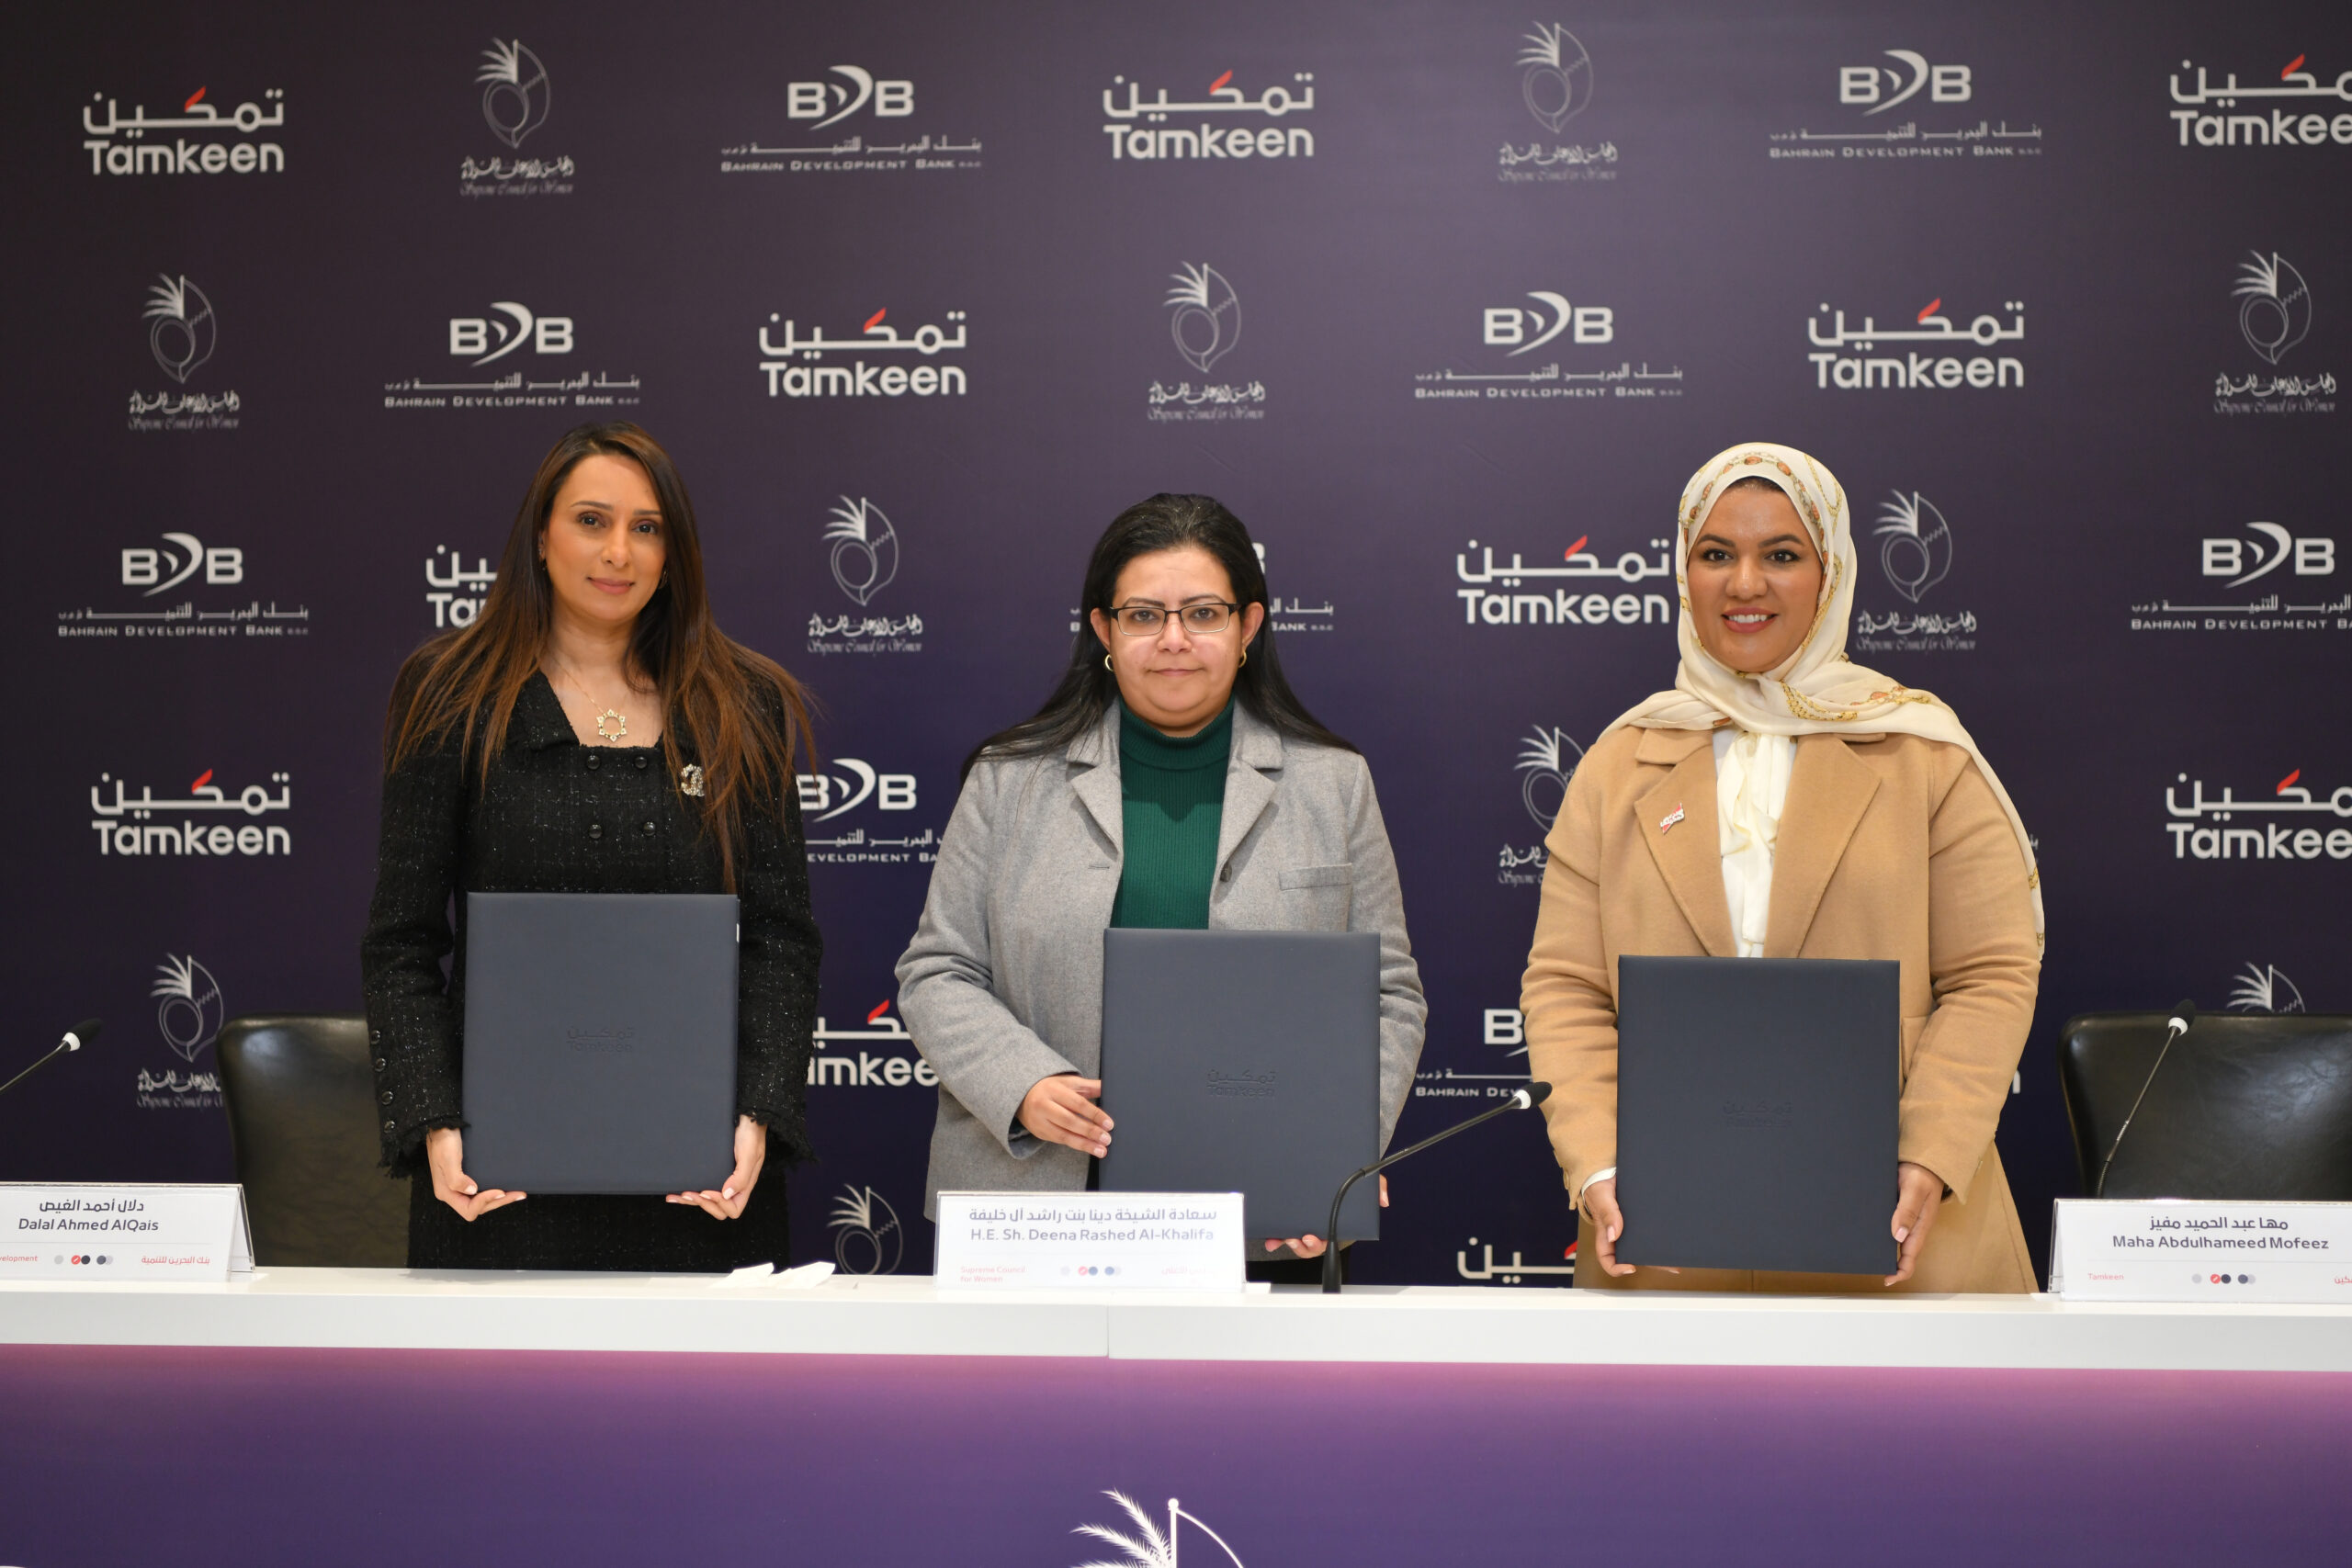 Updated Riyadat Program launched as part of the ongoing partnership between the Supreme Council for Women, Tamkeen, and Bahrain Development Bank